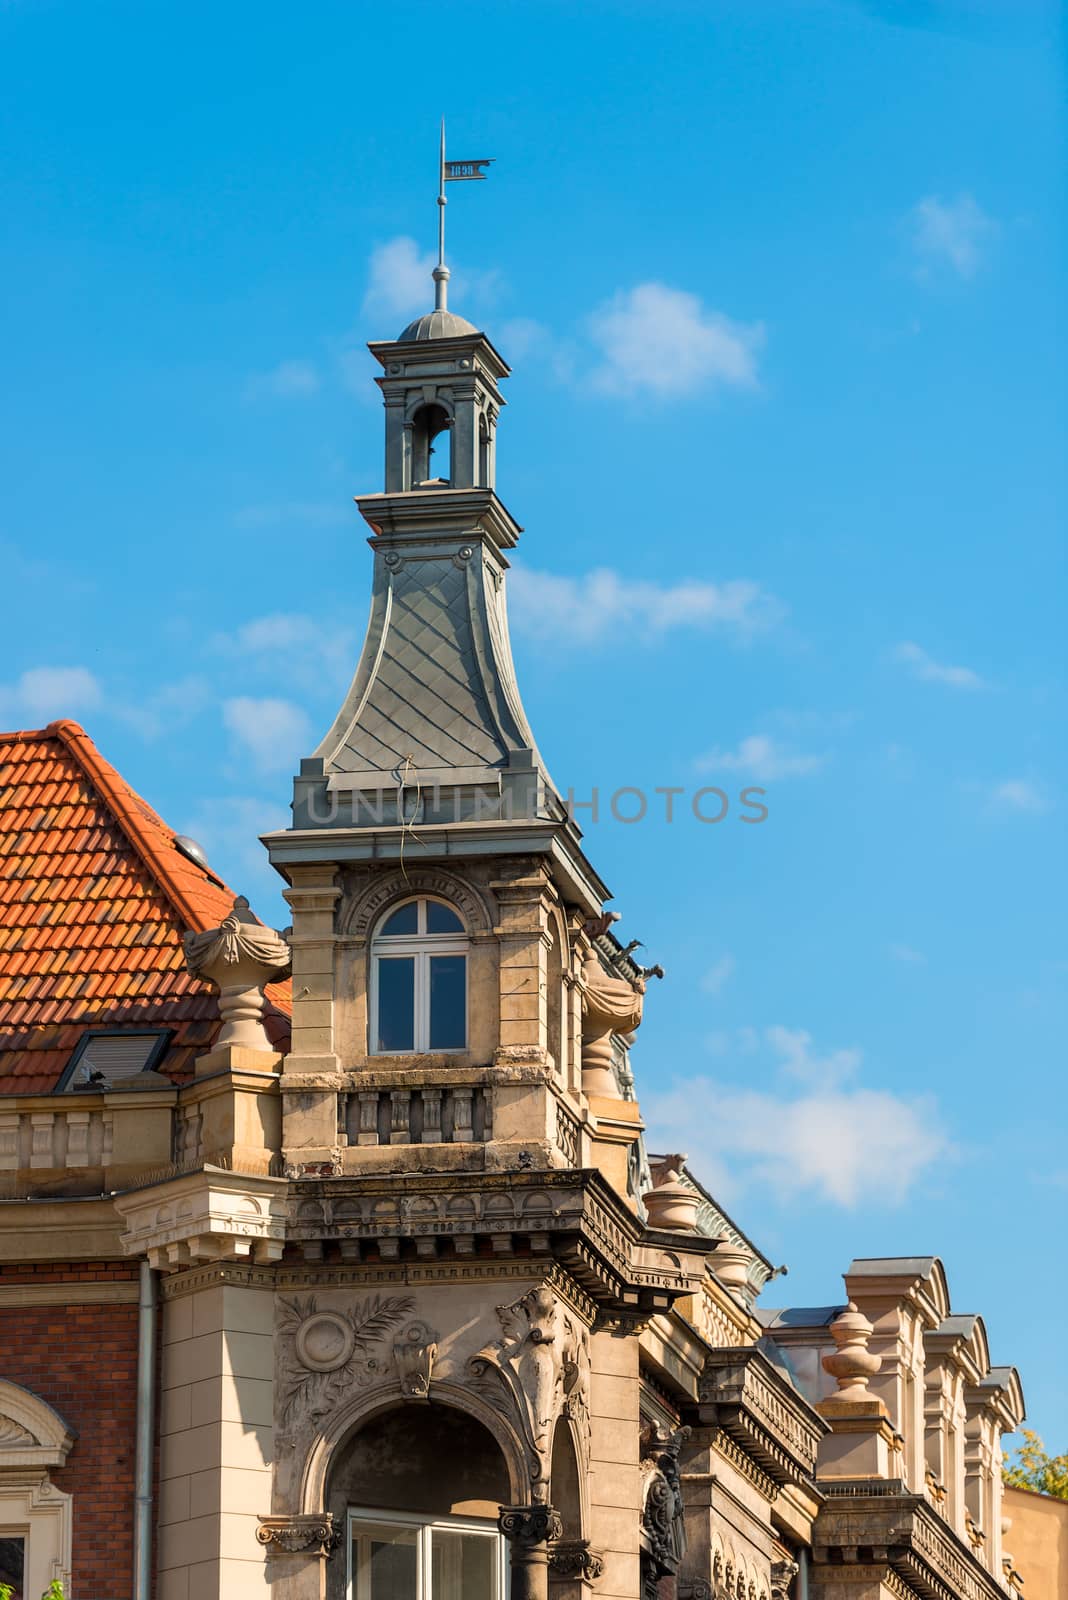 details of the architecture of a European city against a blue sk by kosmsos111